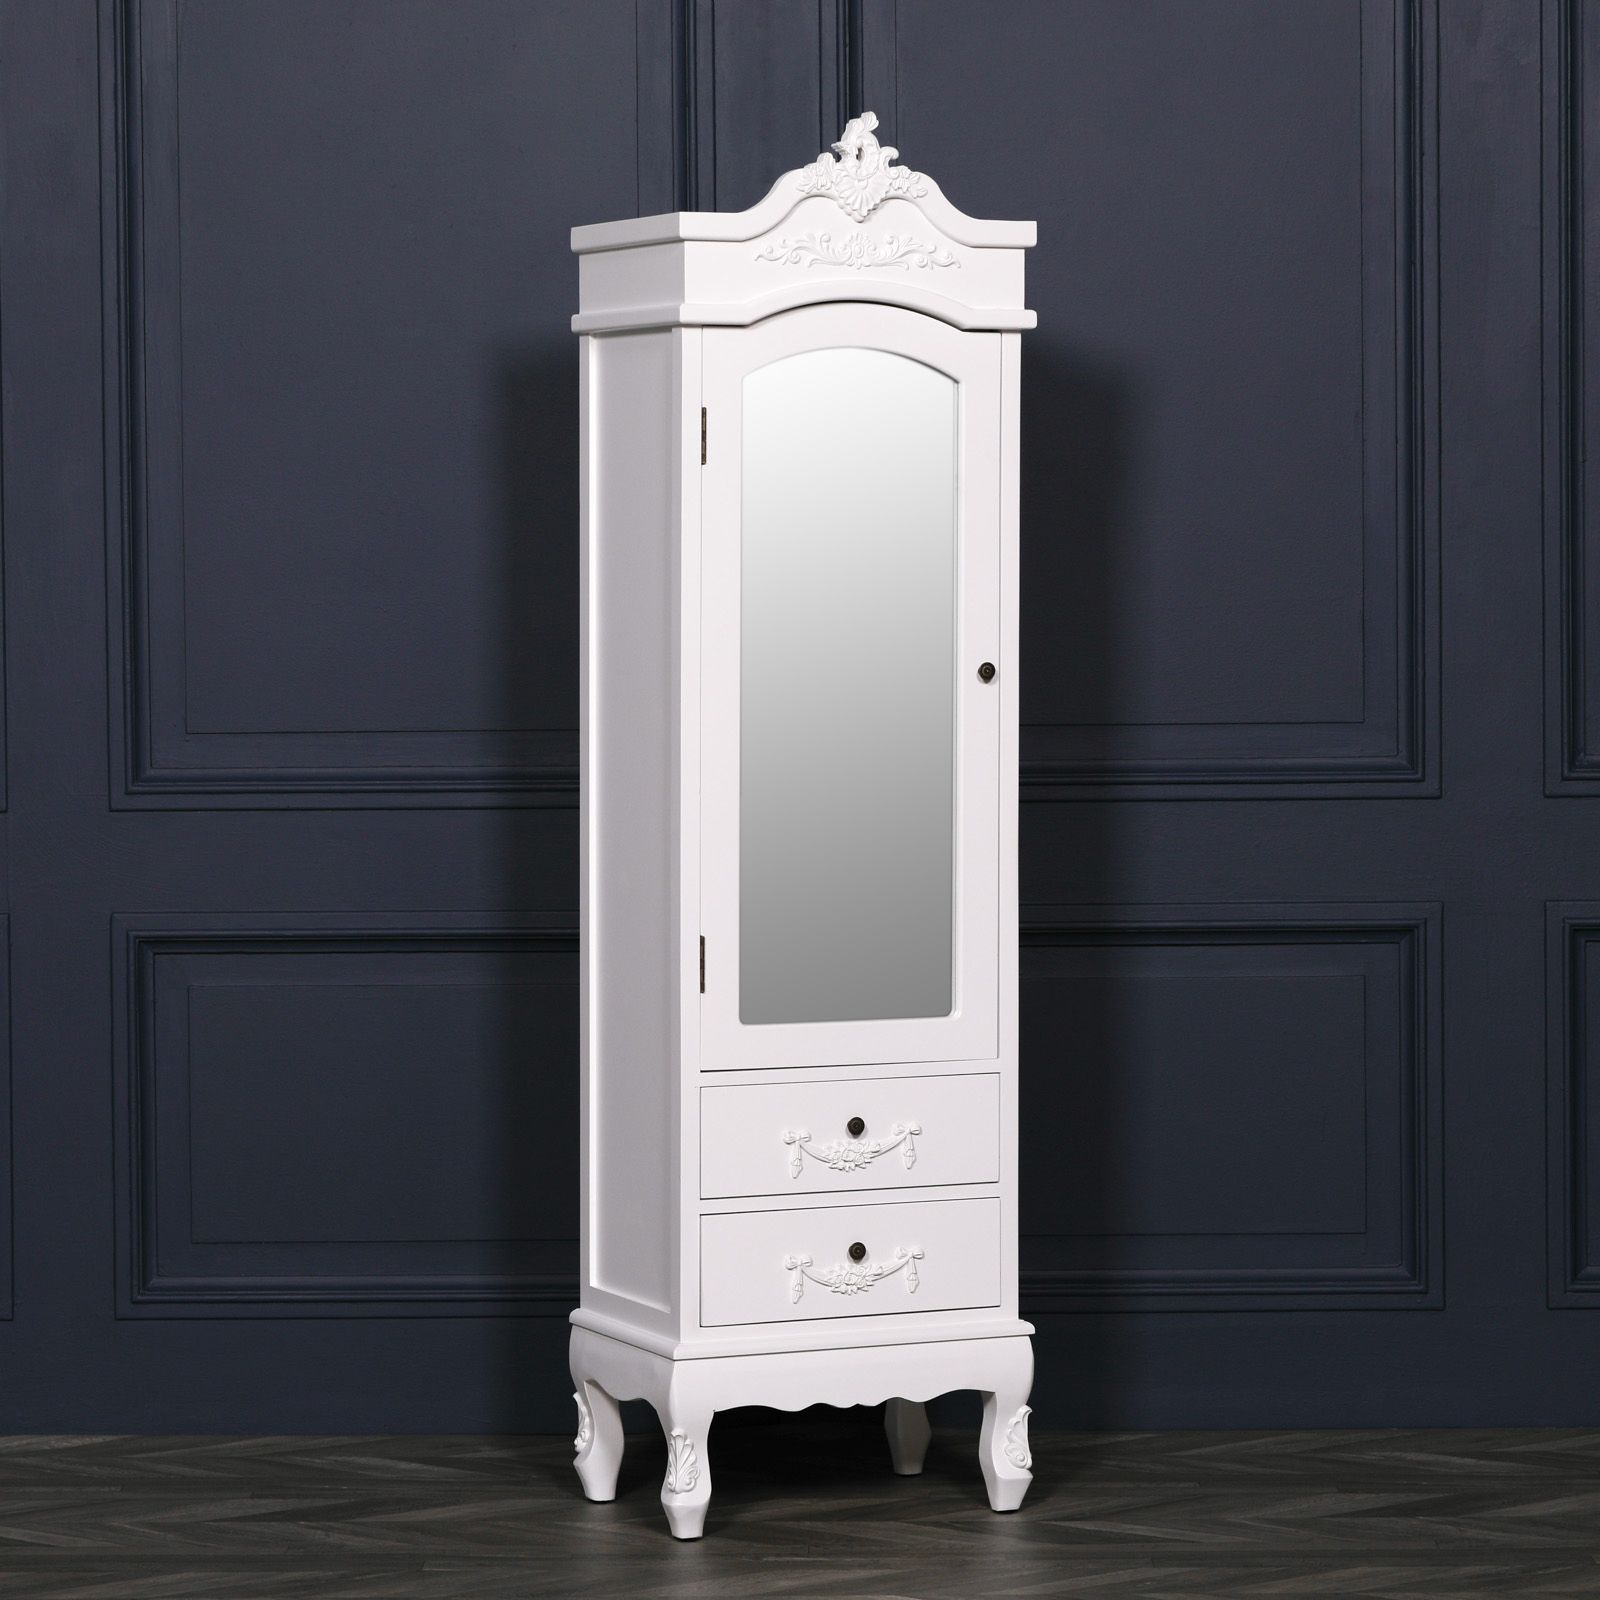 French Style White Single Door Armoire With Full Mirror Doo With Regard To Single French Wardrobes (View 3 of 15)